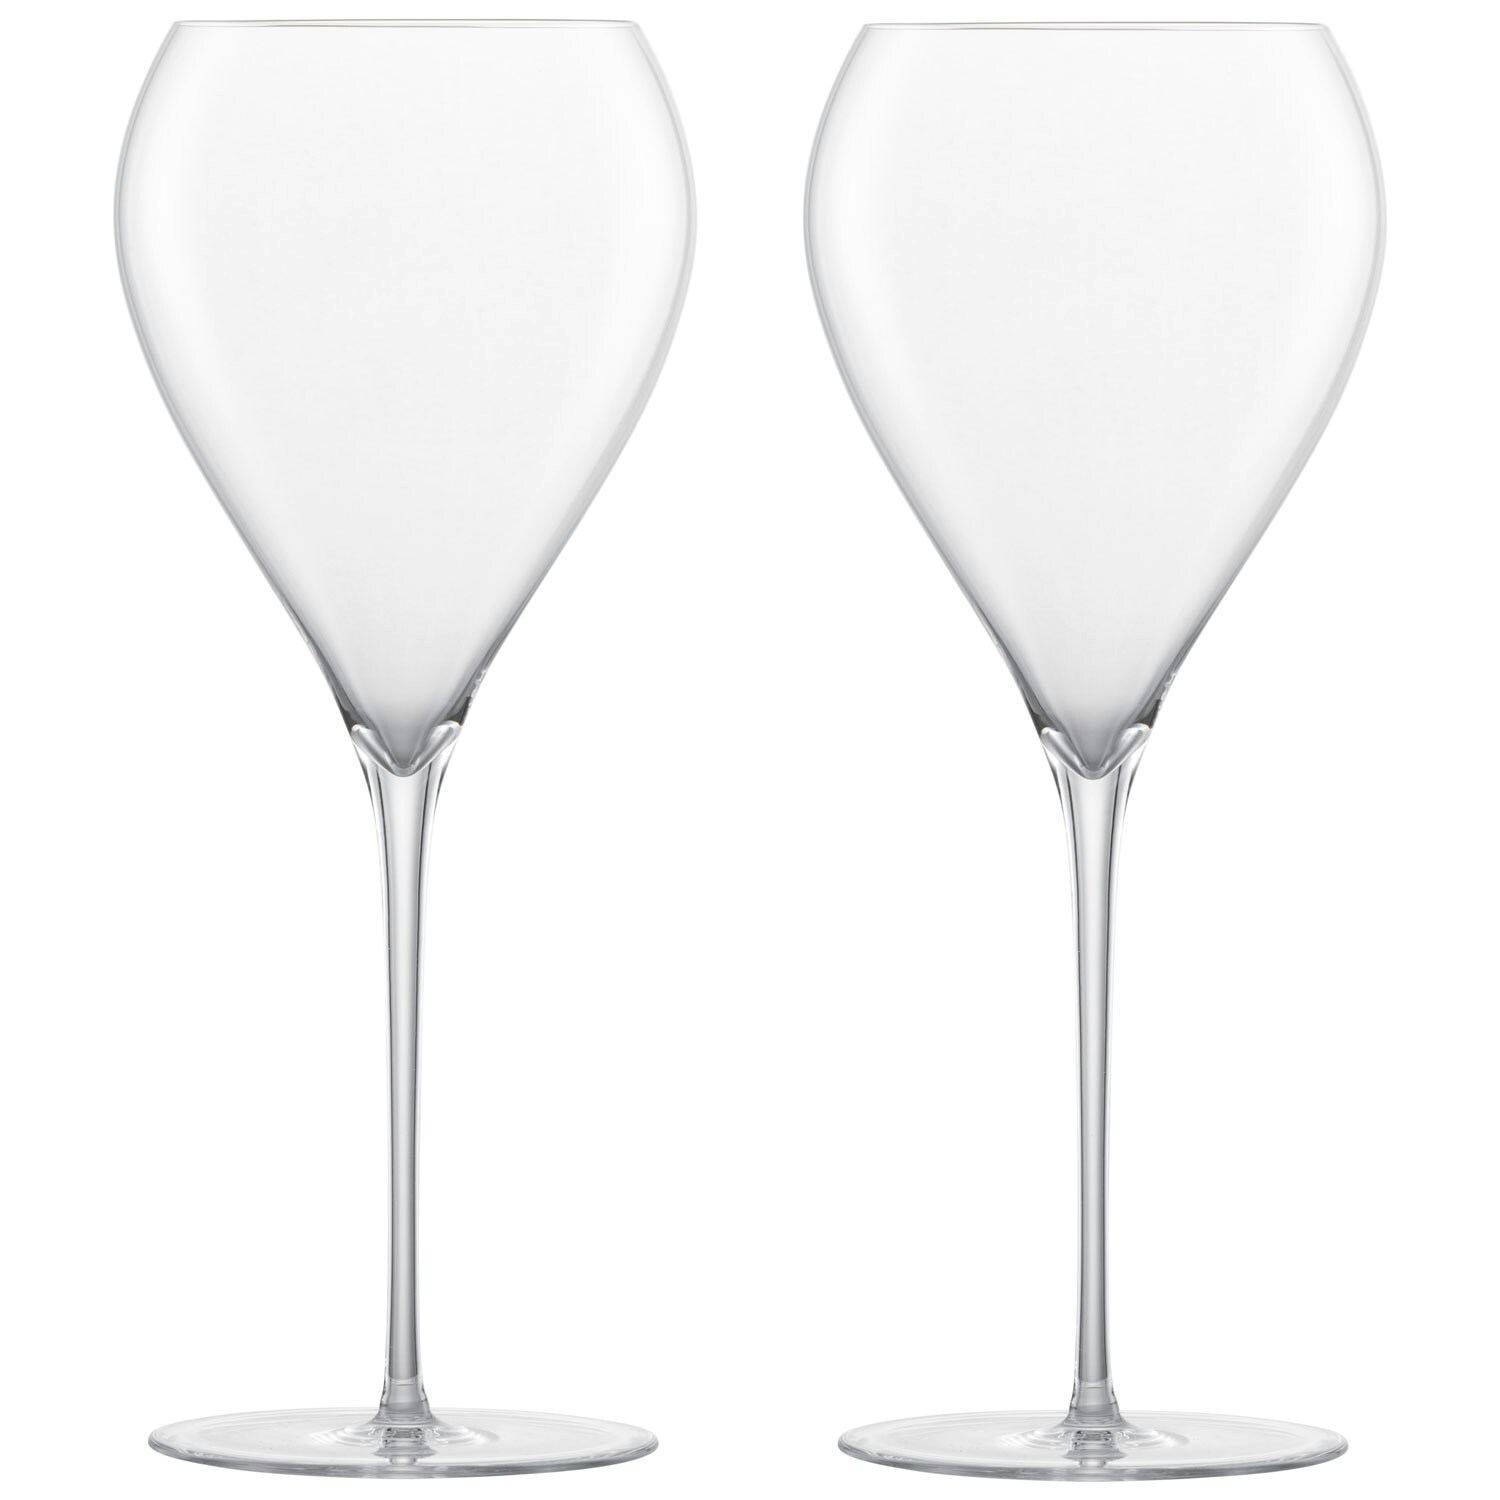 https://royaldesign.com/image/2/zwiesel-enoteca-champagne-glass-67-cl-2-pack-0